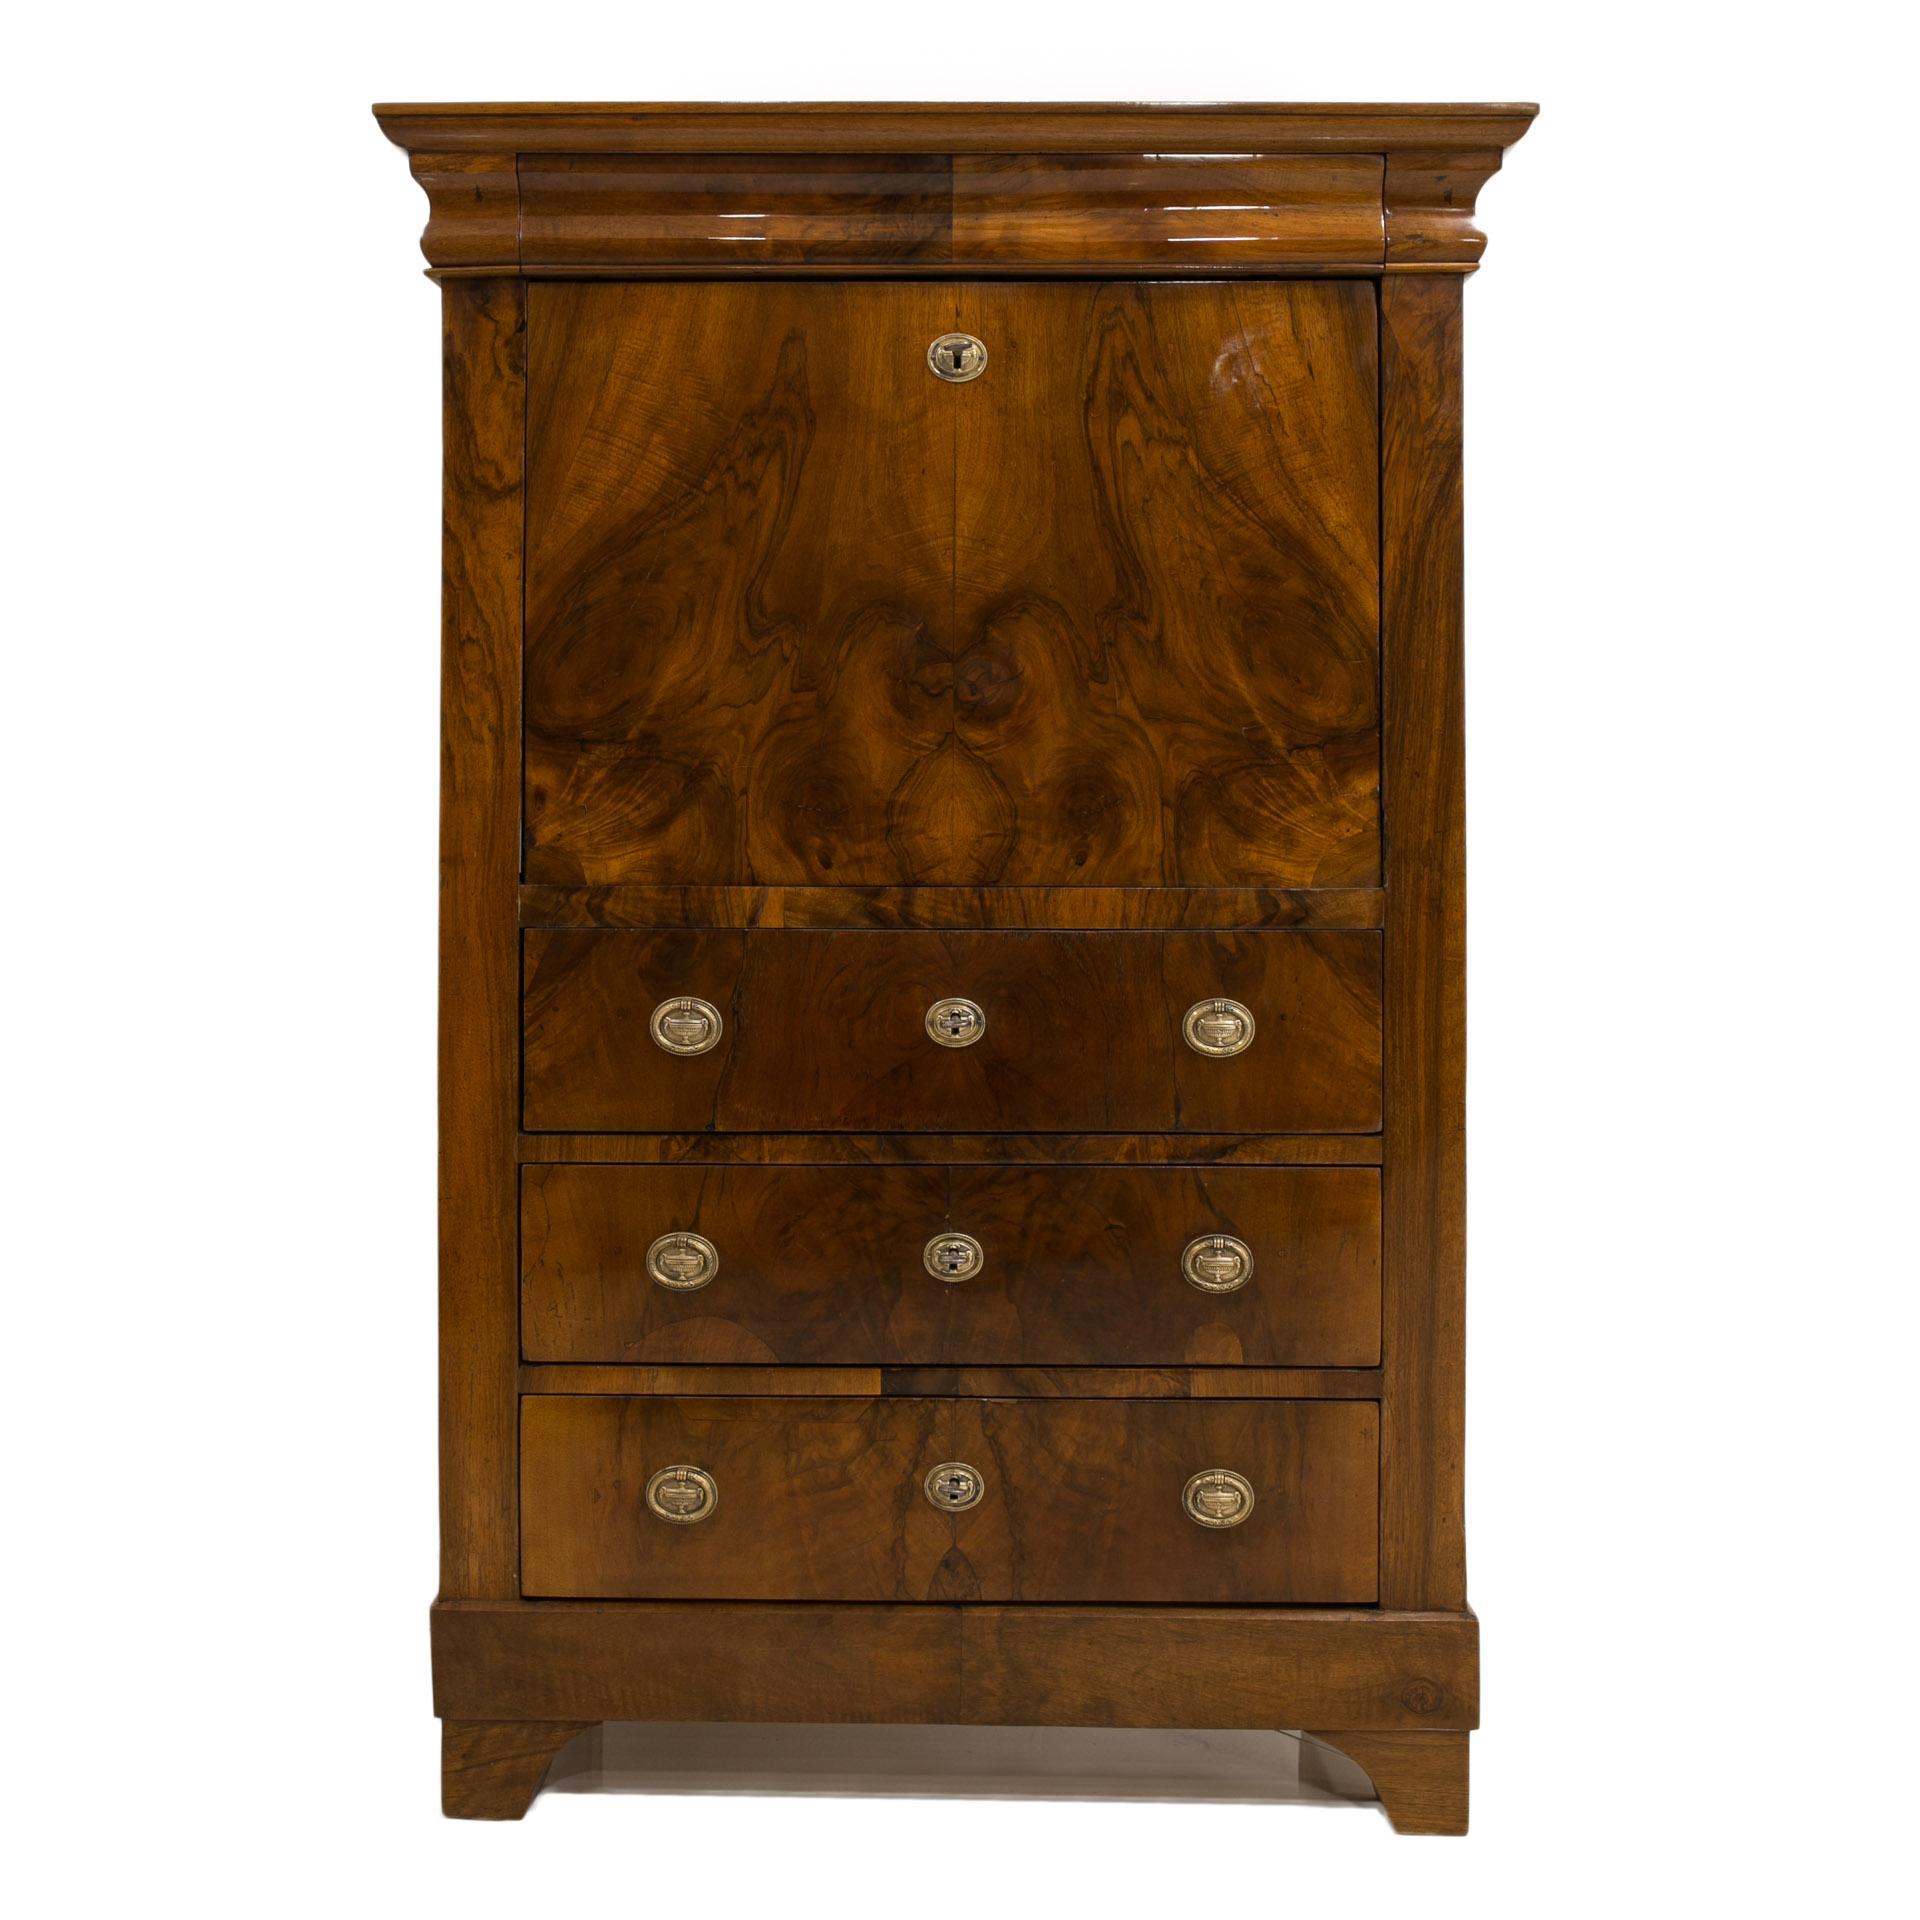 This Biedermeier secretary comes from Germany and was constructed in 19th century. It is made of coniferous wood, veneered vertically with walnut. This secretary desk has undergone a professional renovation process. Surface is finished with shellac